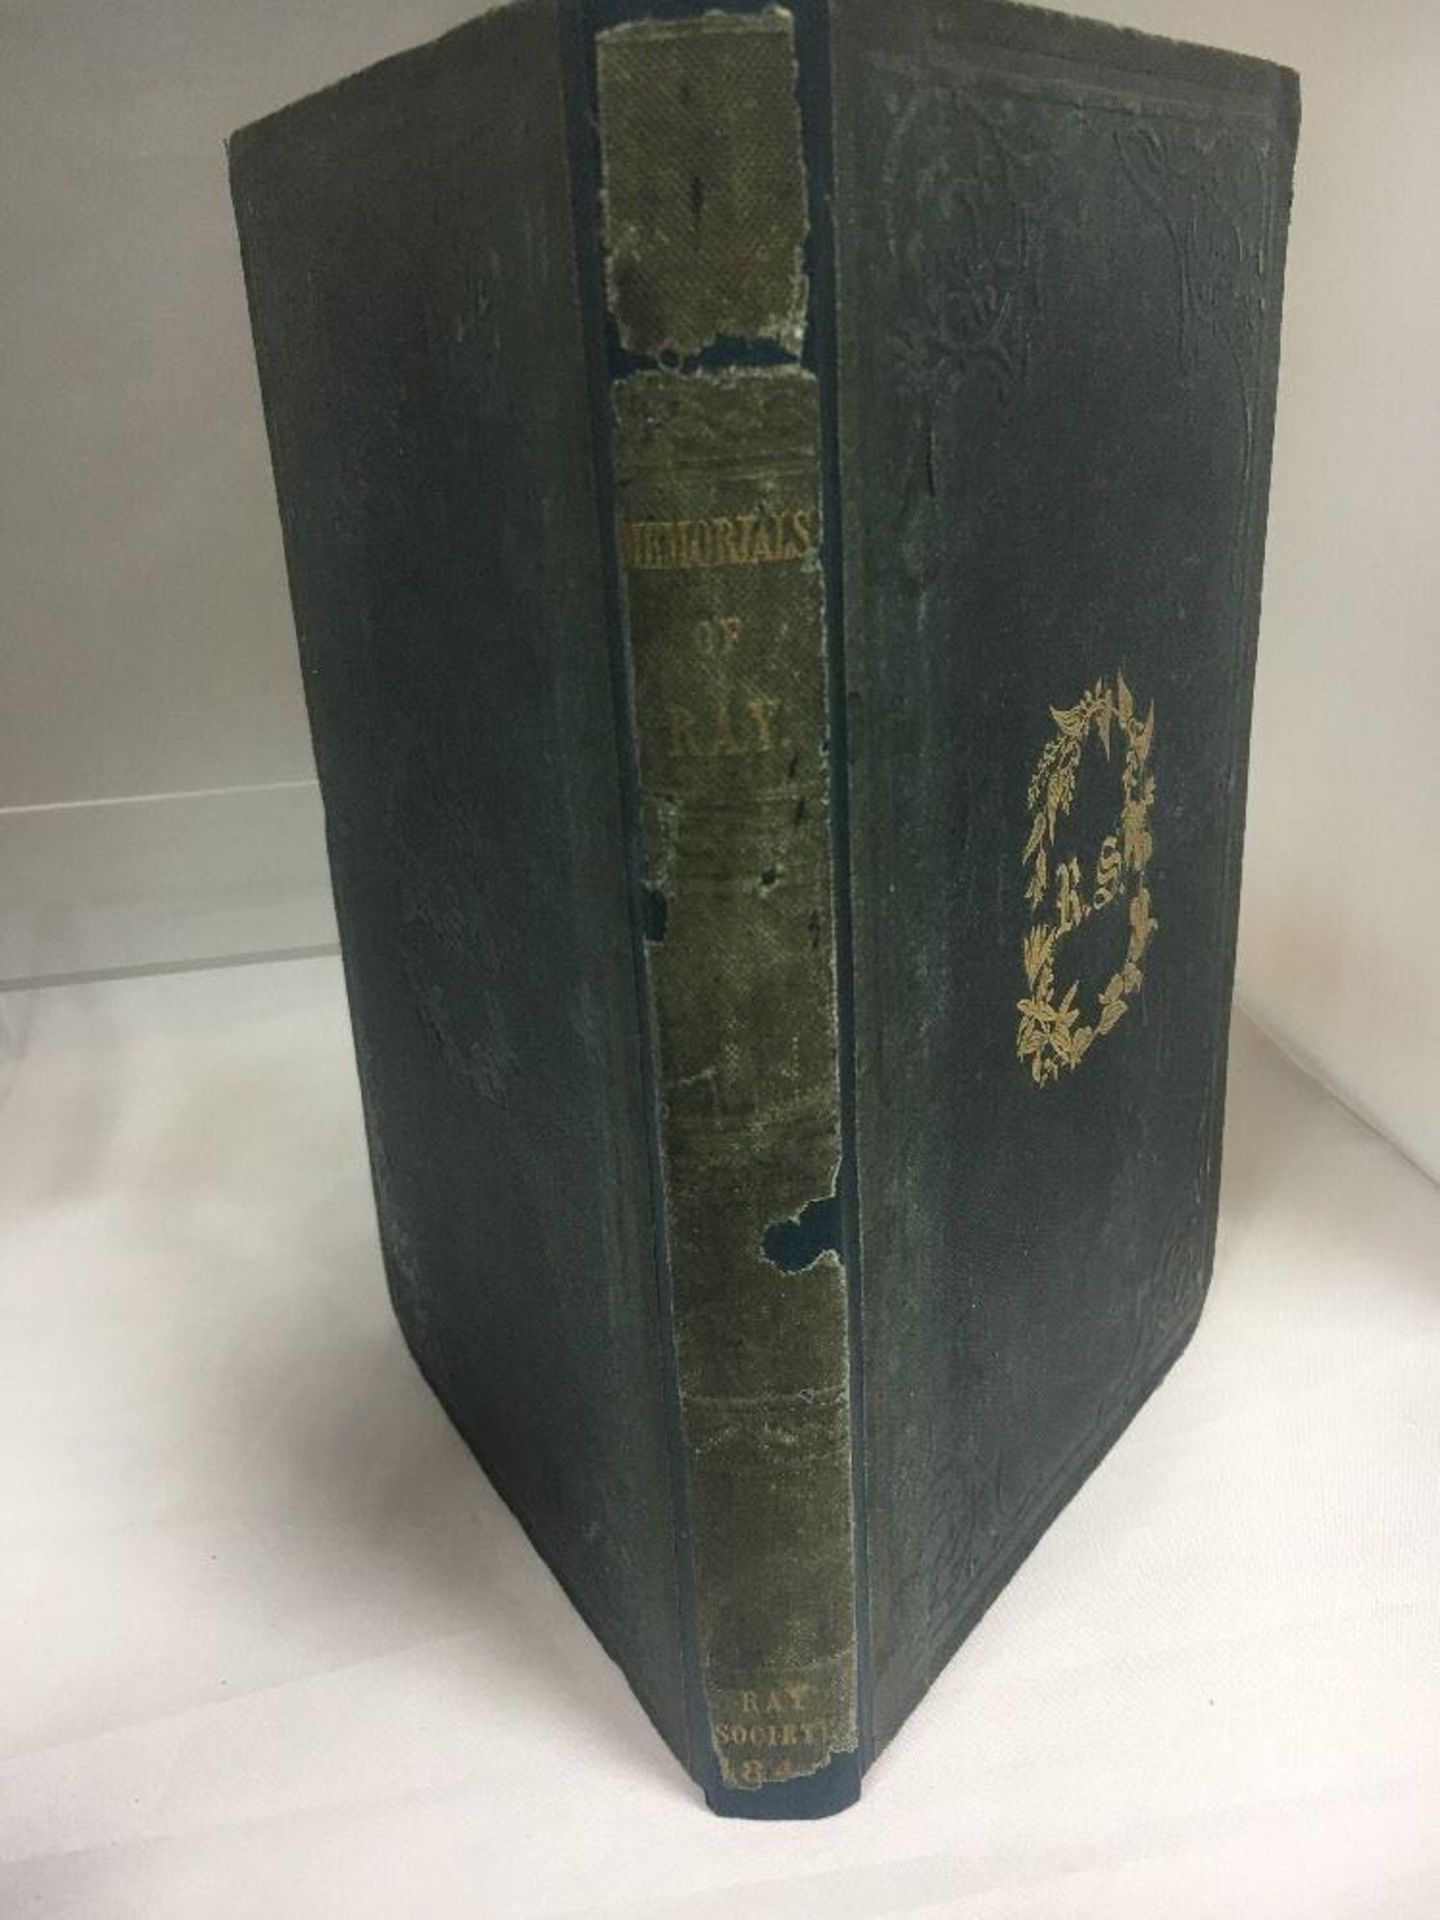 ANTIQUE BOOK - MEMORIALS OF JOHN RAY HIS LIFE BY DR. DERHAM THE RAY SOCIETY 1846 - Image 2 of 4